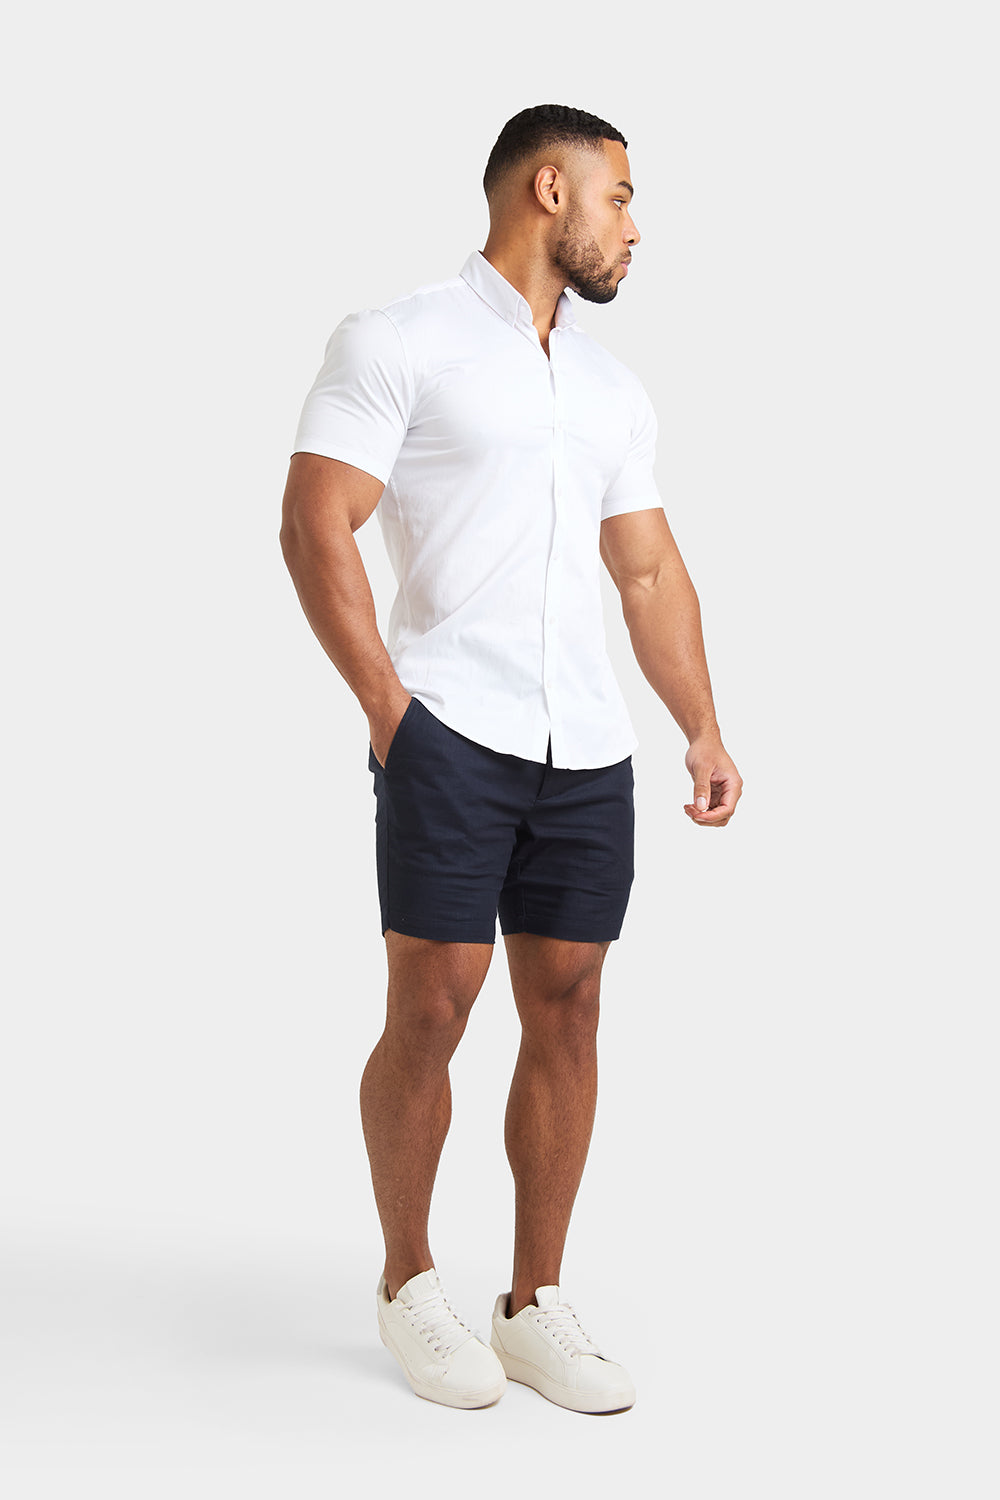 Linen Blend Side Adjuster Shorts in Navy - TAILORED ATHLETE - ROW